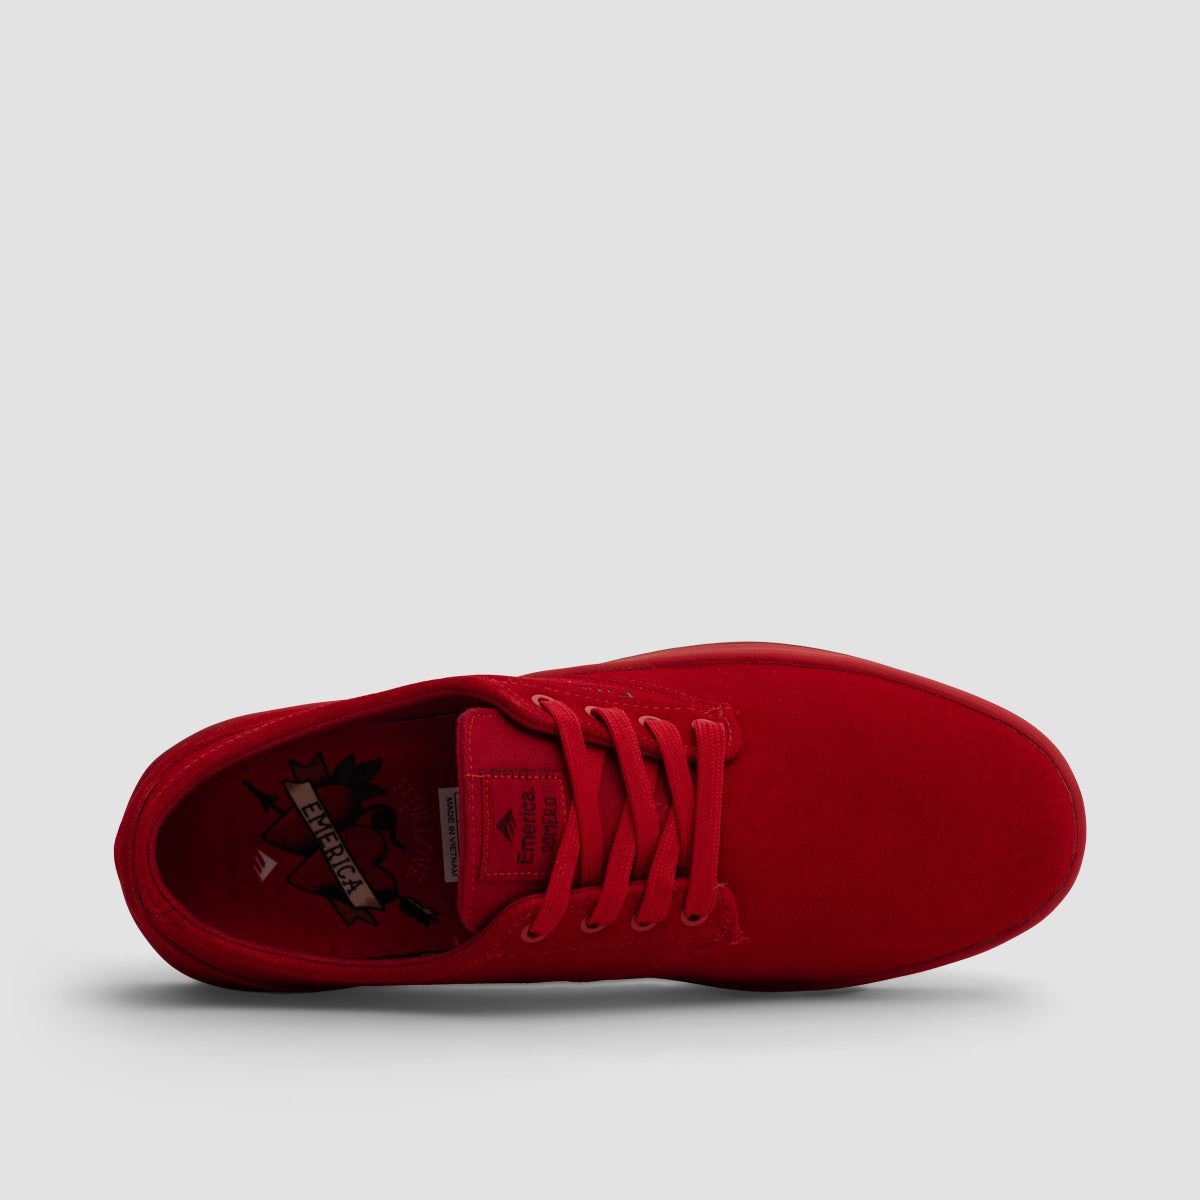 Emerica The Romero Laced Shoes - Red/Gold